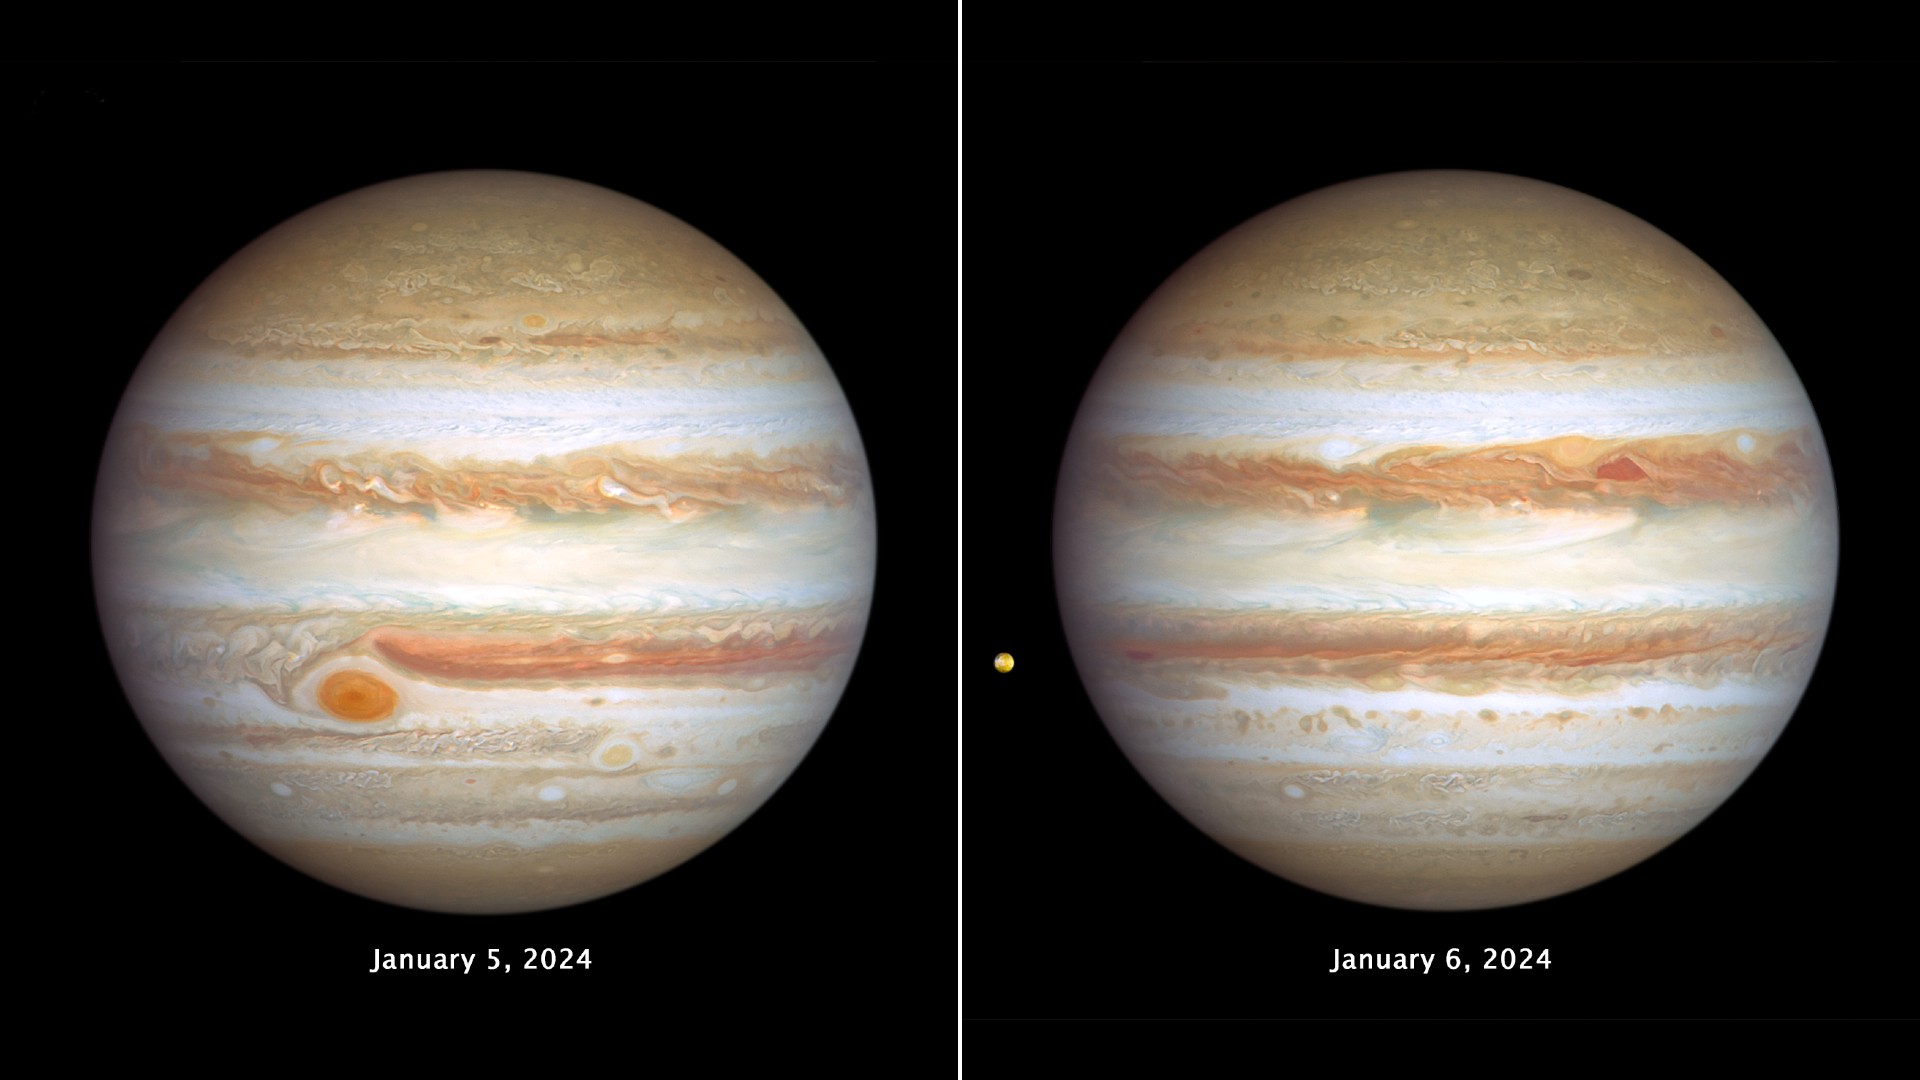 Hubble Telescope spies stormy weather and a shrinking Great Red Spot on Jupiter (video) Space